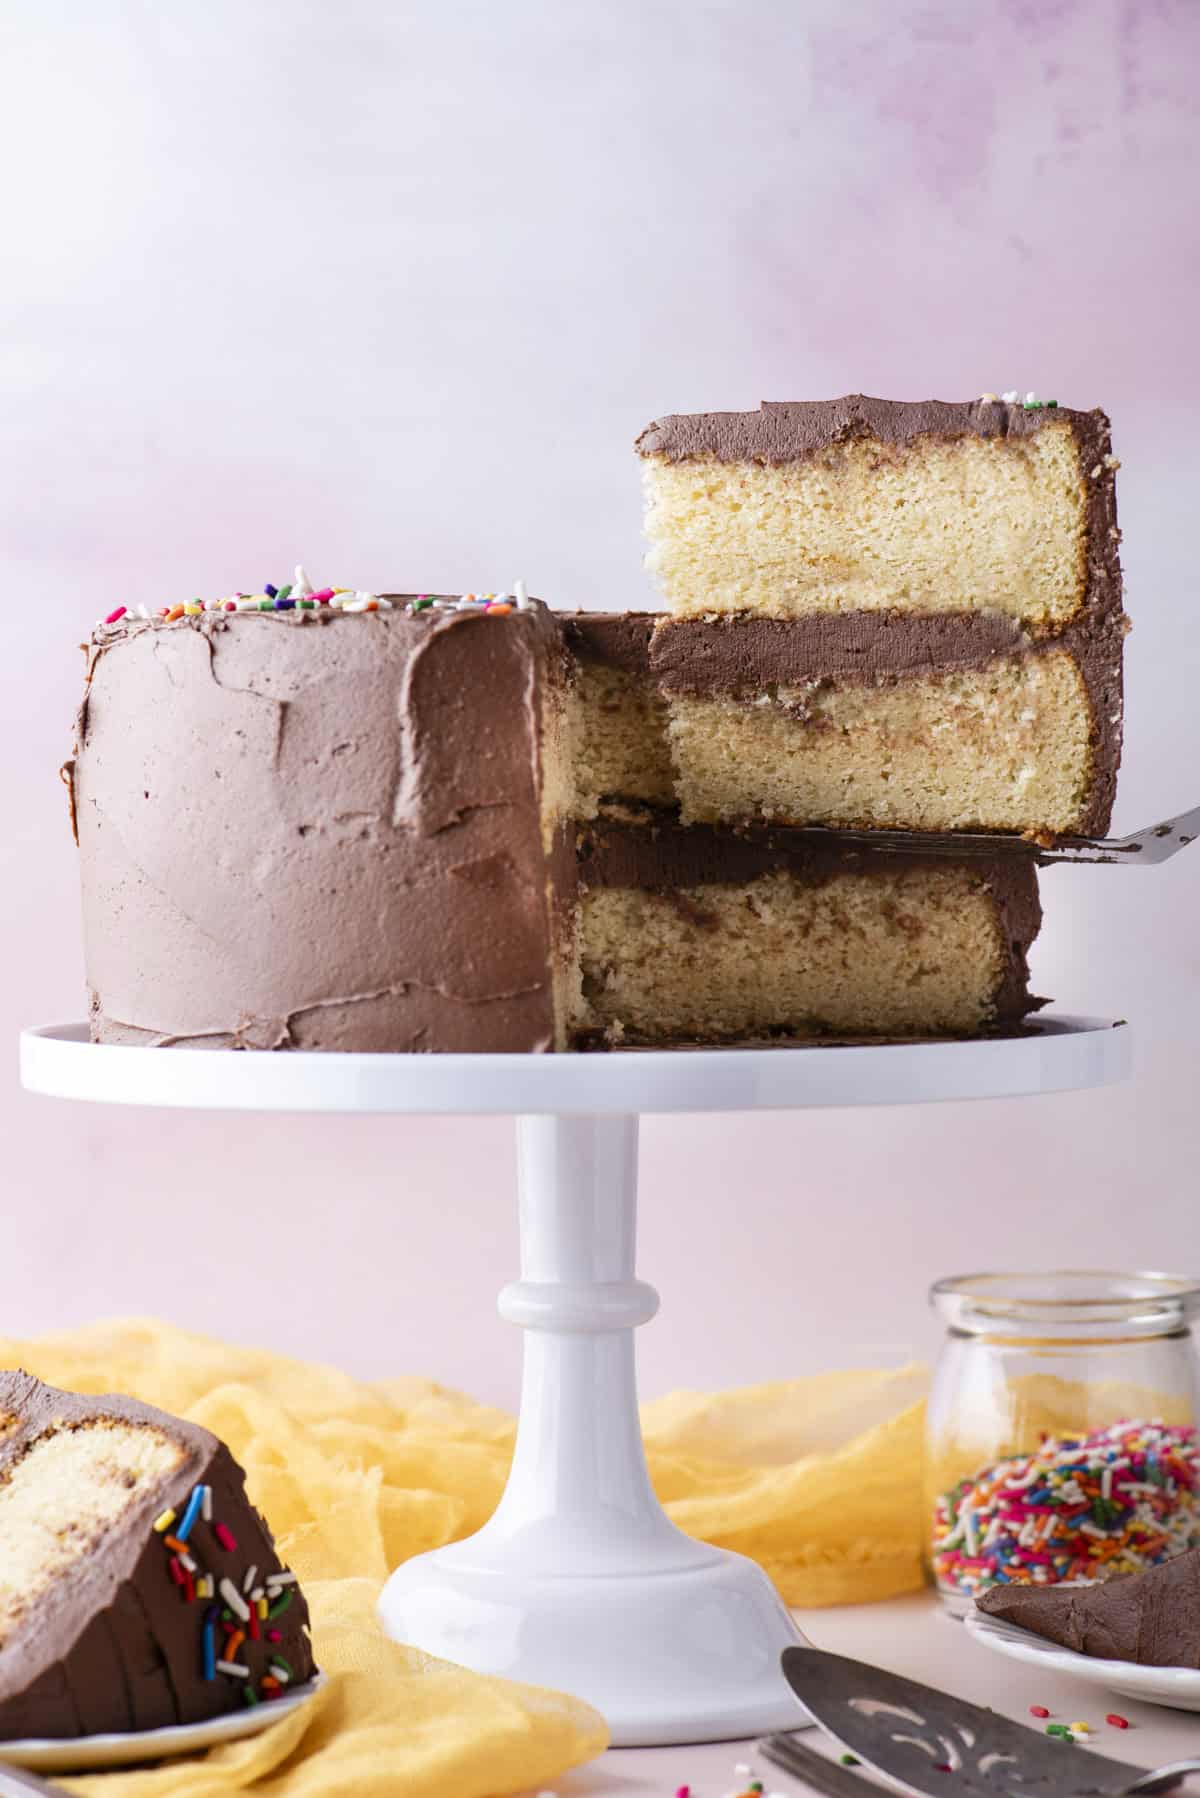 a slice of two layer yellow gluten free cake with chocolate frosting being lifted away from the rest of the cake on a white cake stand, with a slice on a white plate, a fork and metal spatula, a yellow cloth, and a clear class jar of rainbow sprinkles beneath it